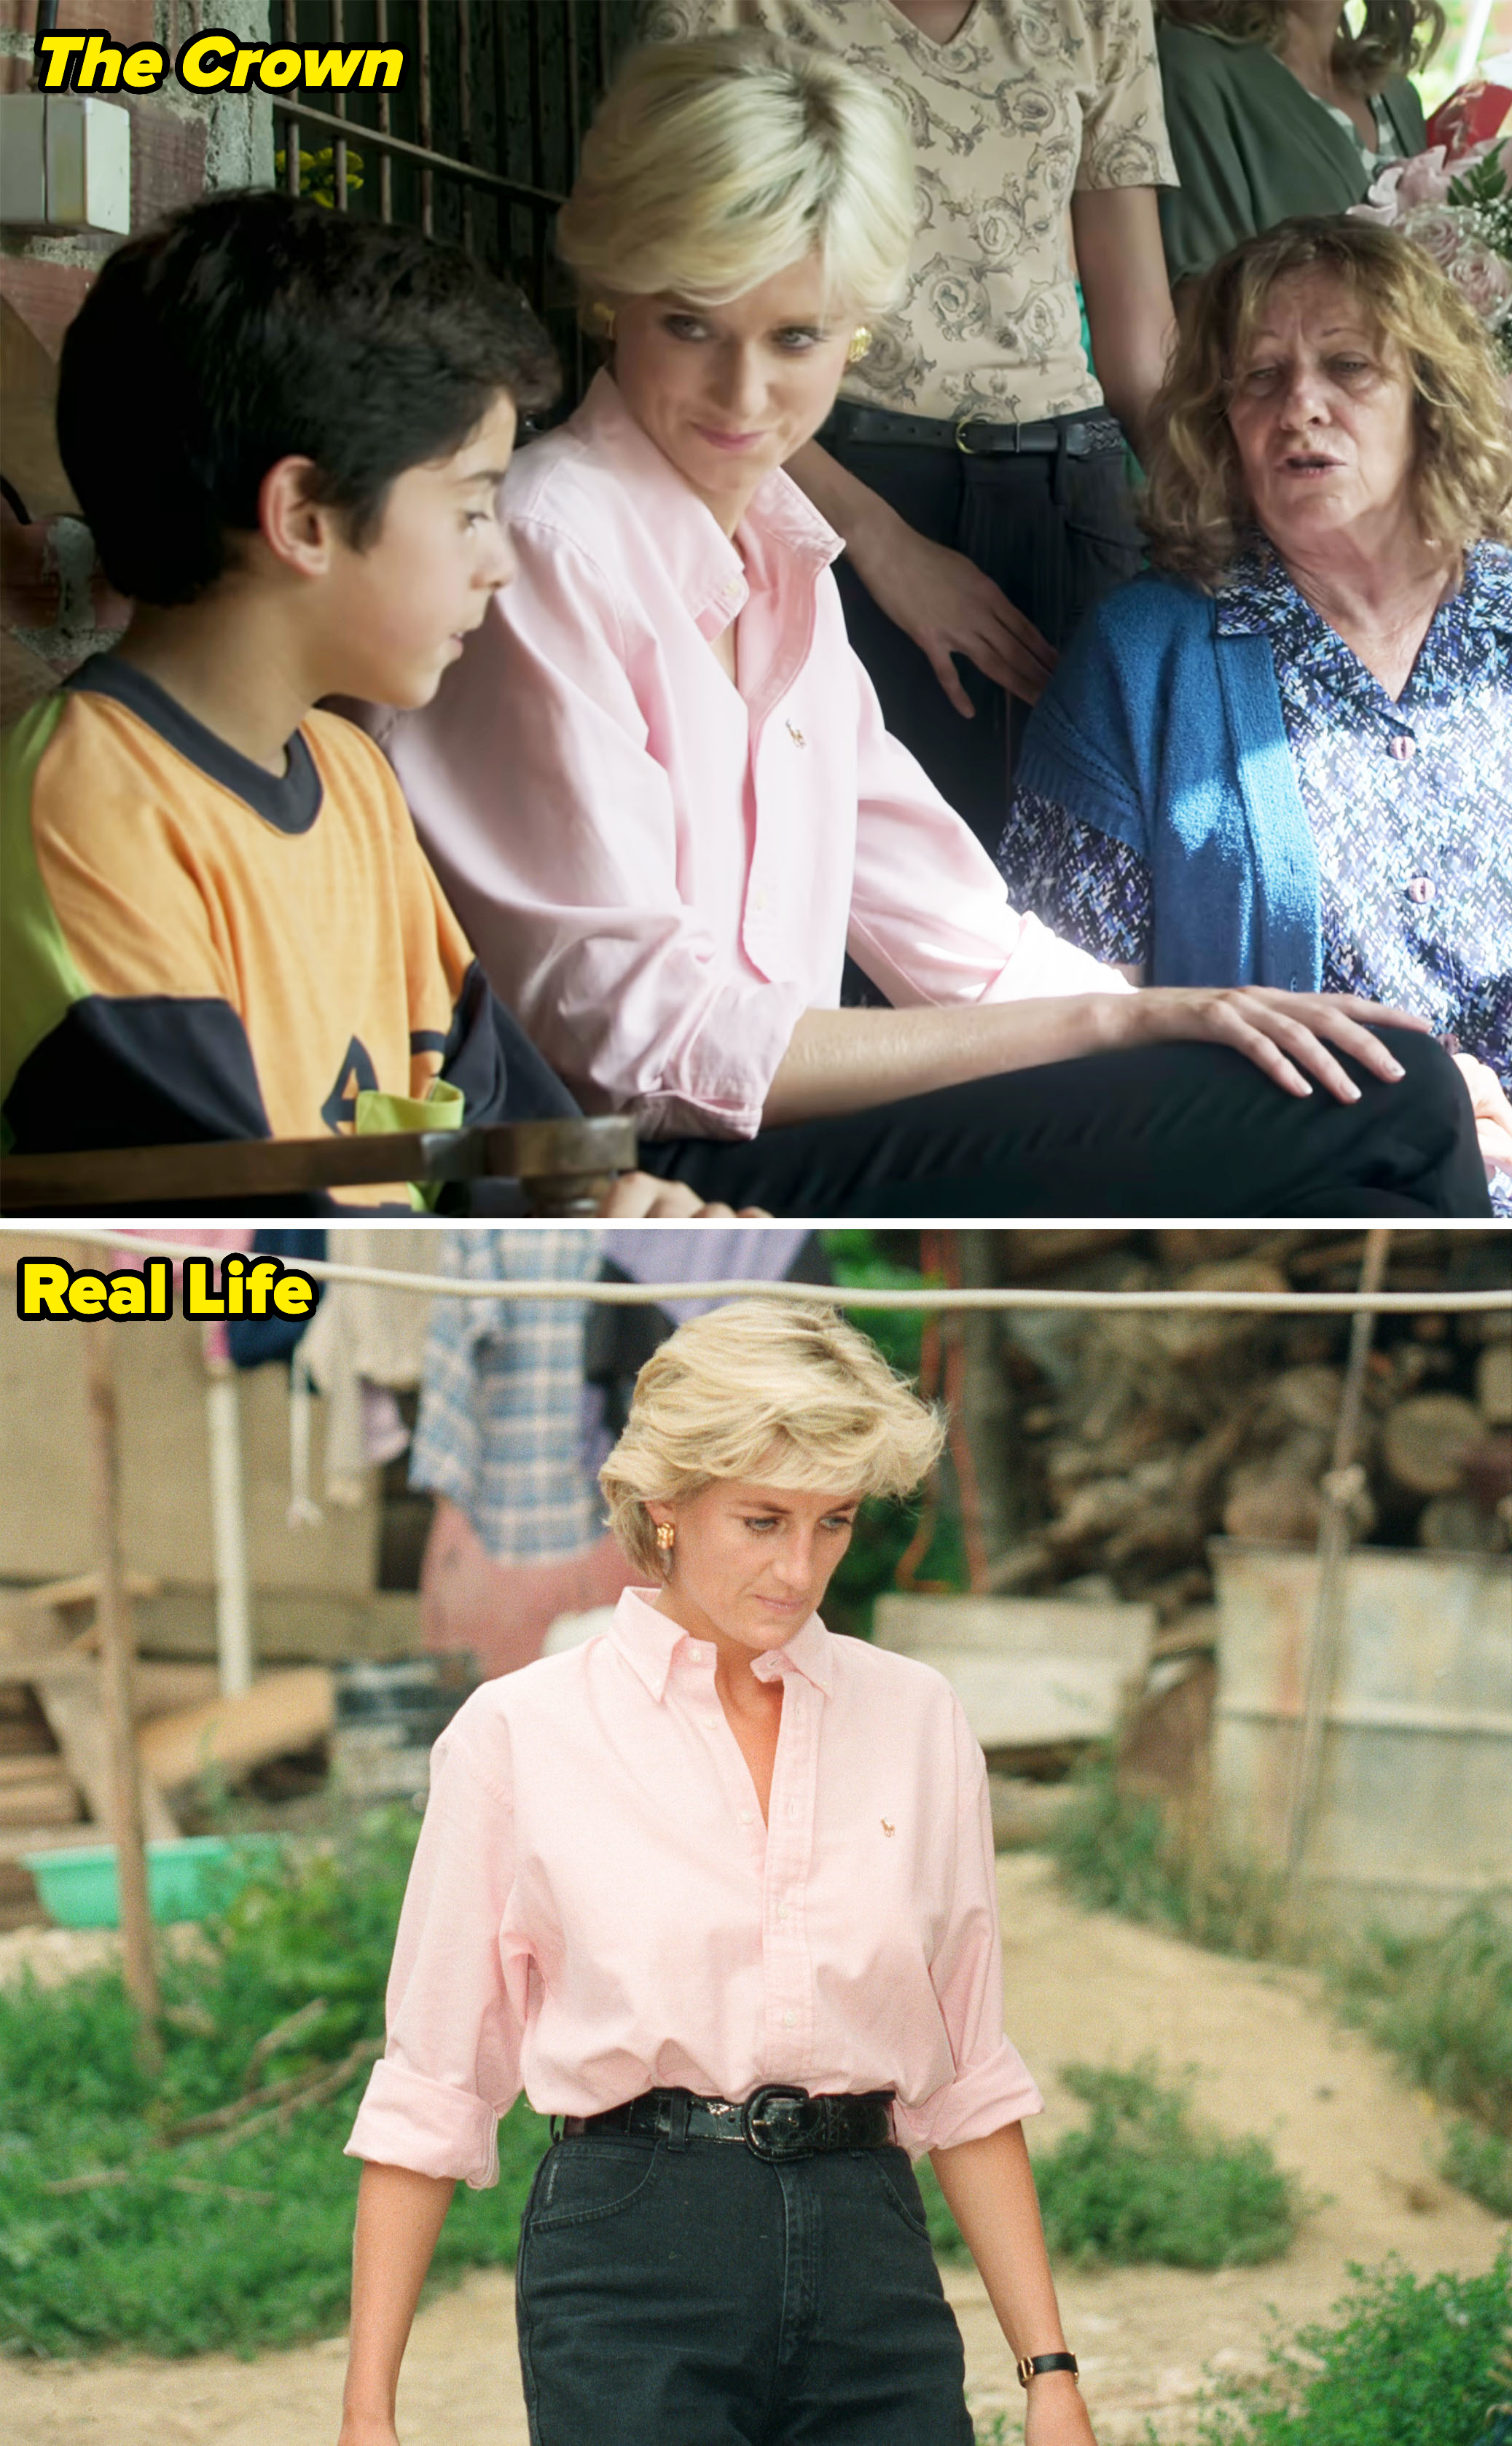 Side-by-sides of Princess Diana's humanitarian work